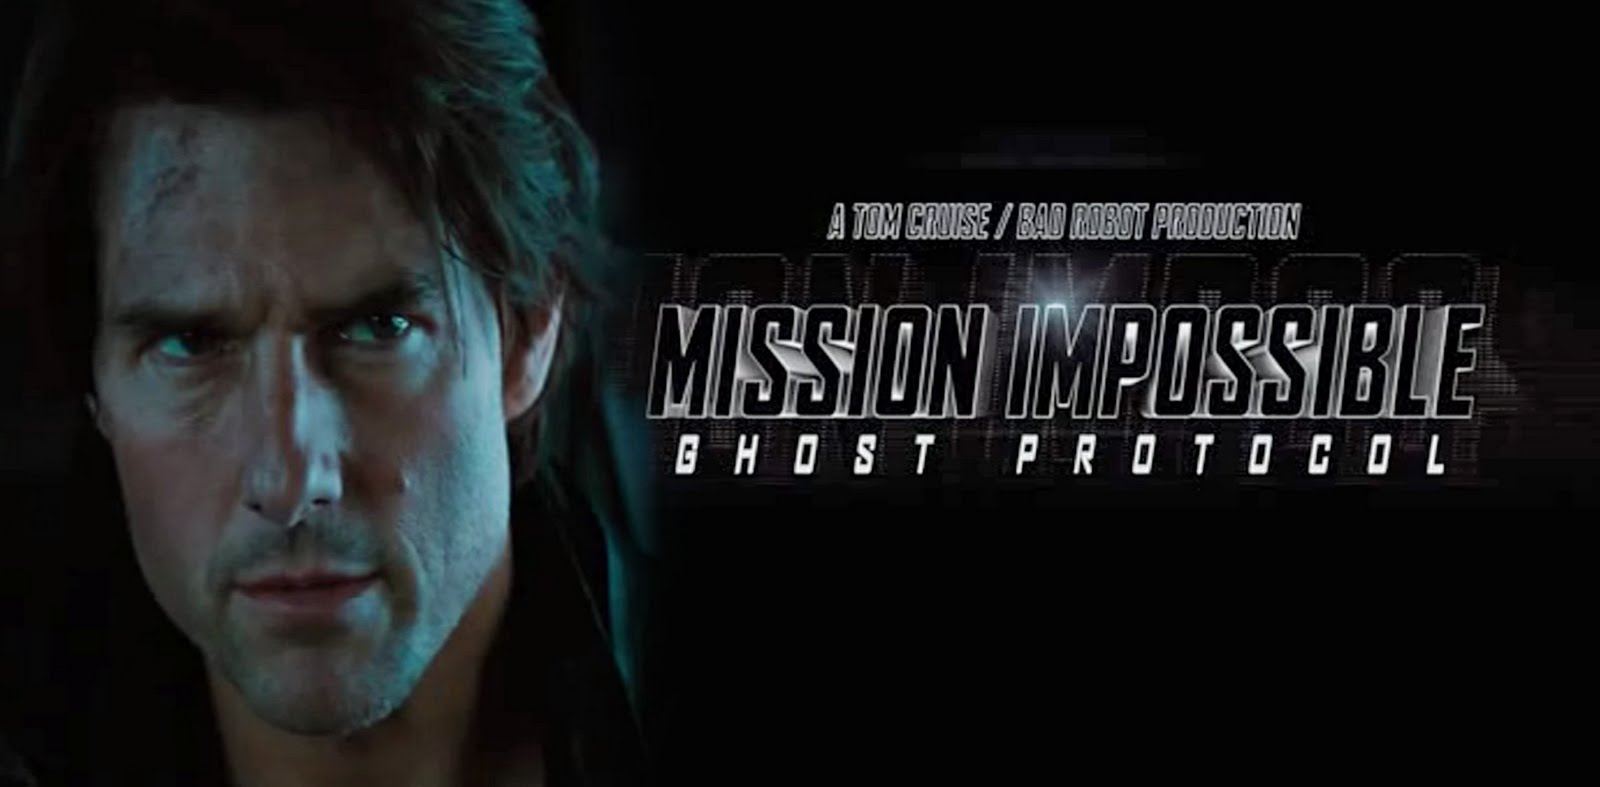 The Newest, Longer Mission Impossible II Trailer: “Ghost Protocol”